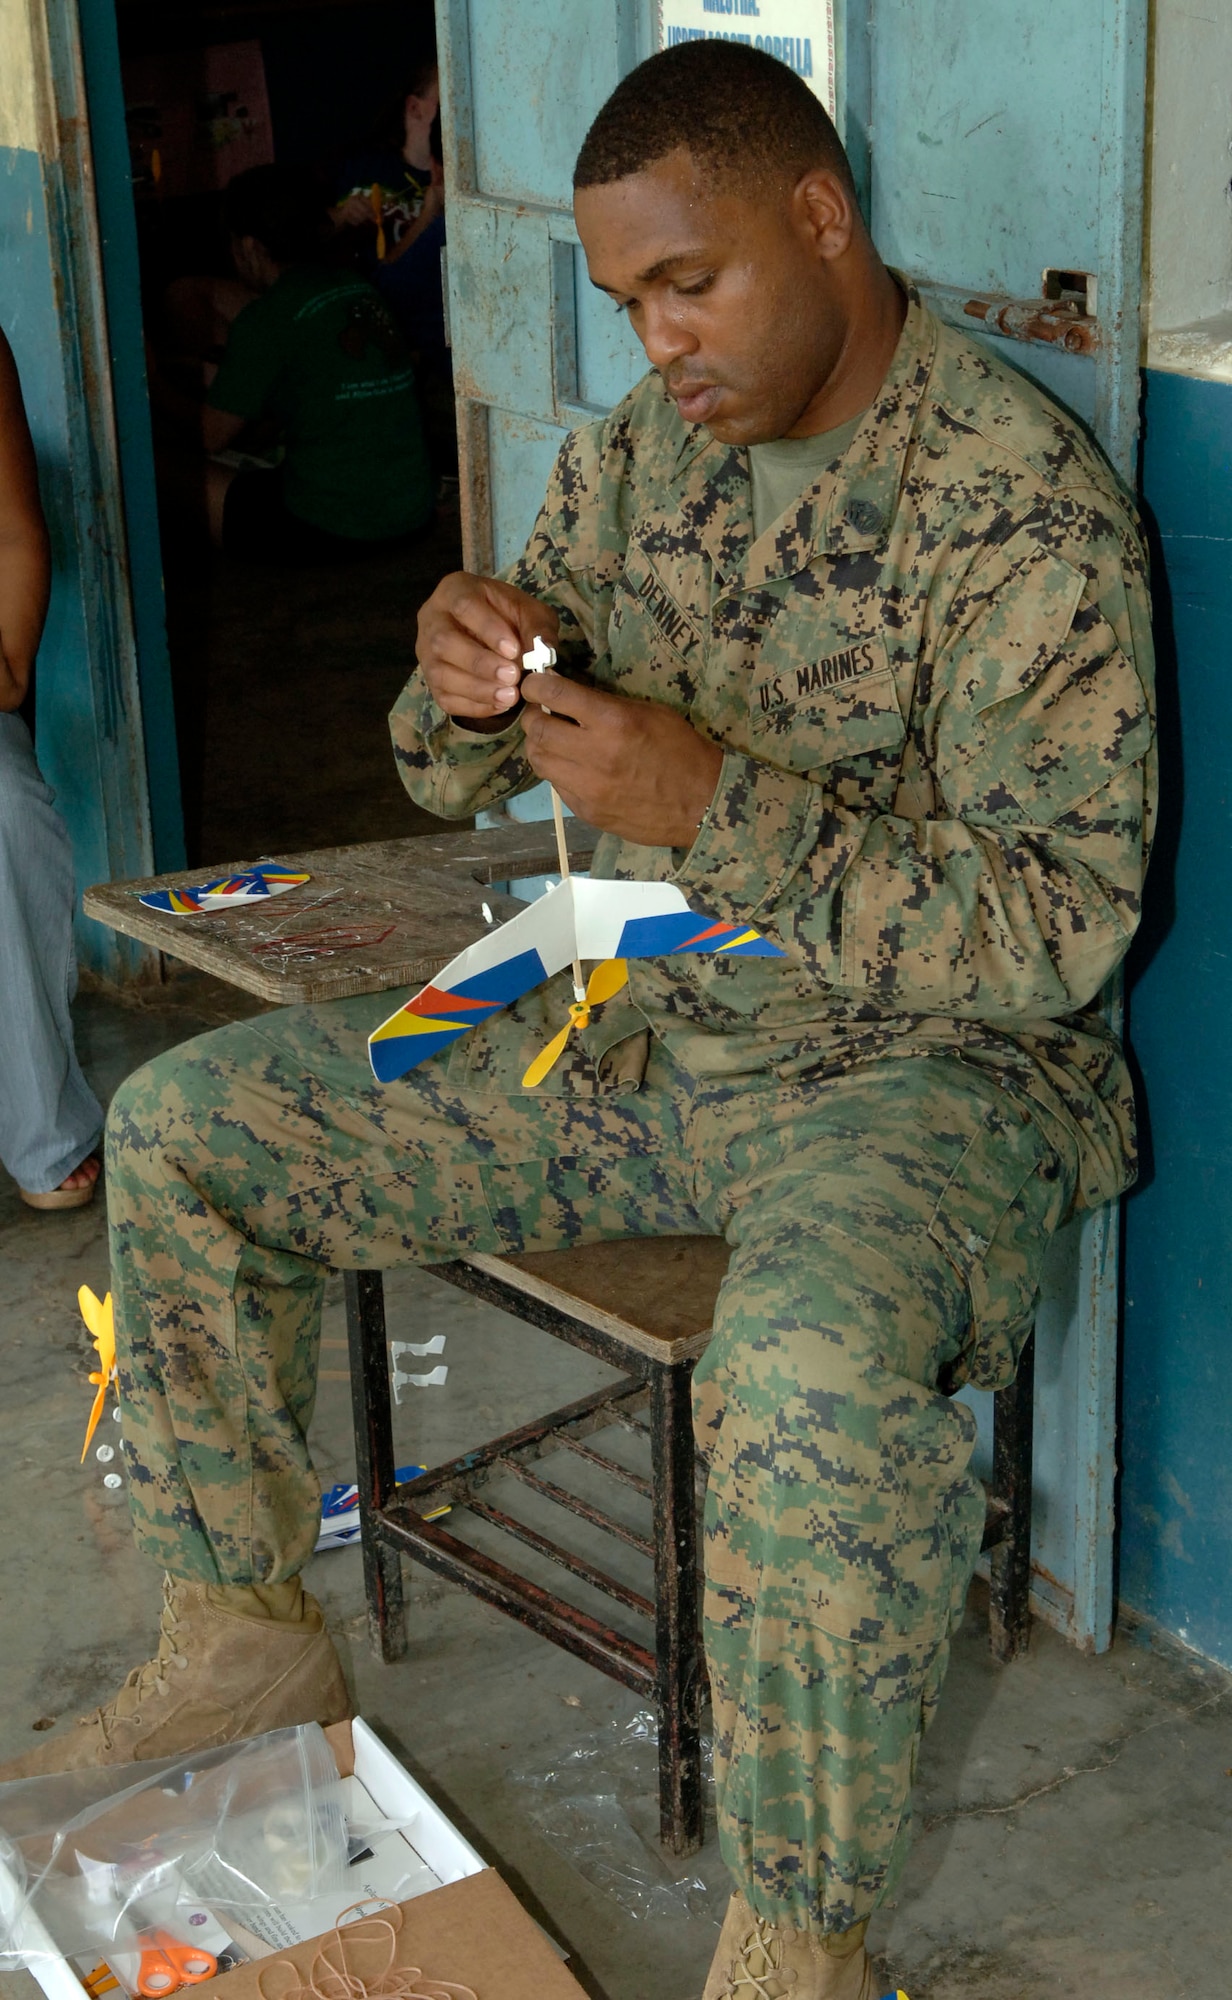 Gunnery Sgt. Howard Denney, a civil affairs Marine deployed from the 4th Civil Affairs Group, helps children assemble rubber band airplanes at the Sansonsito School July 12. (U.S. Air Force photo/Tech. Sgt. Eric Petosky)